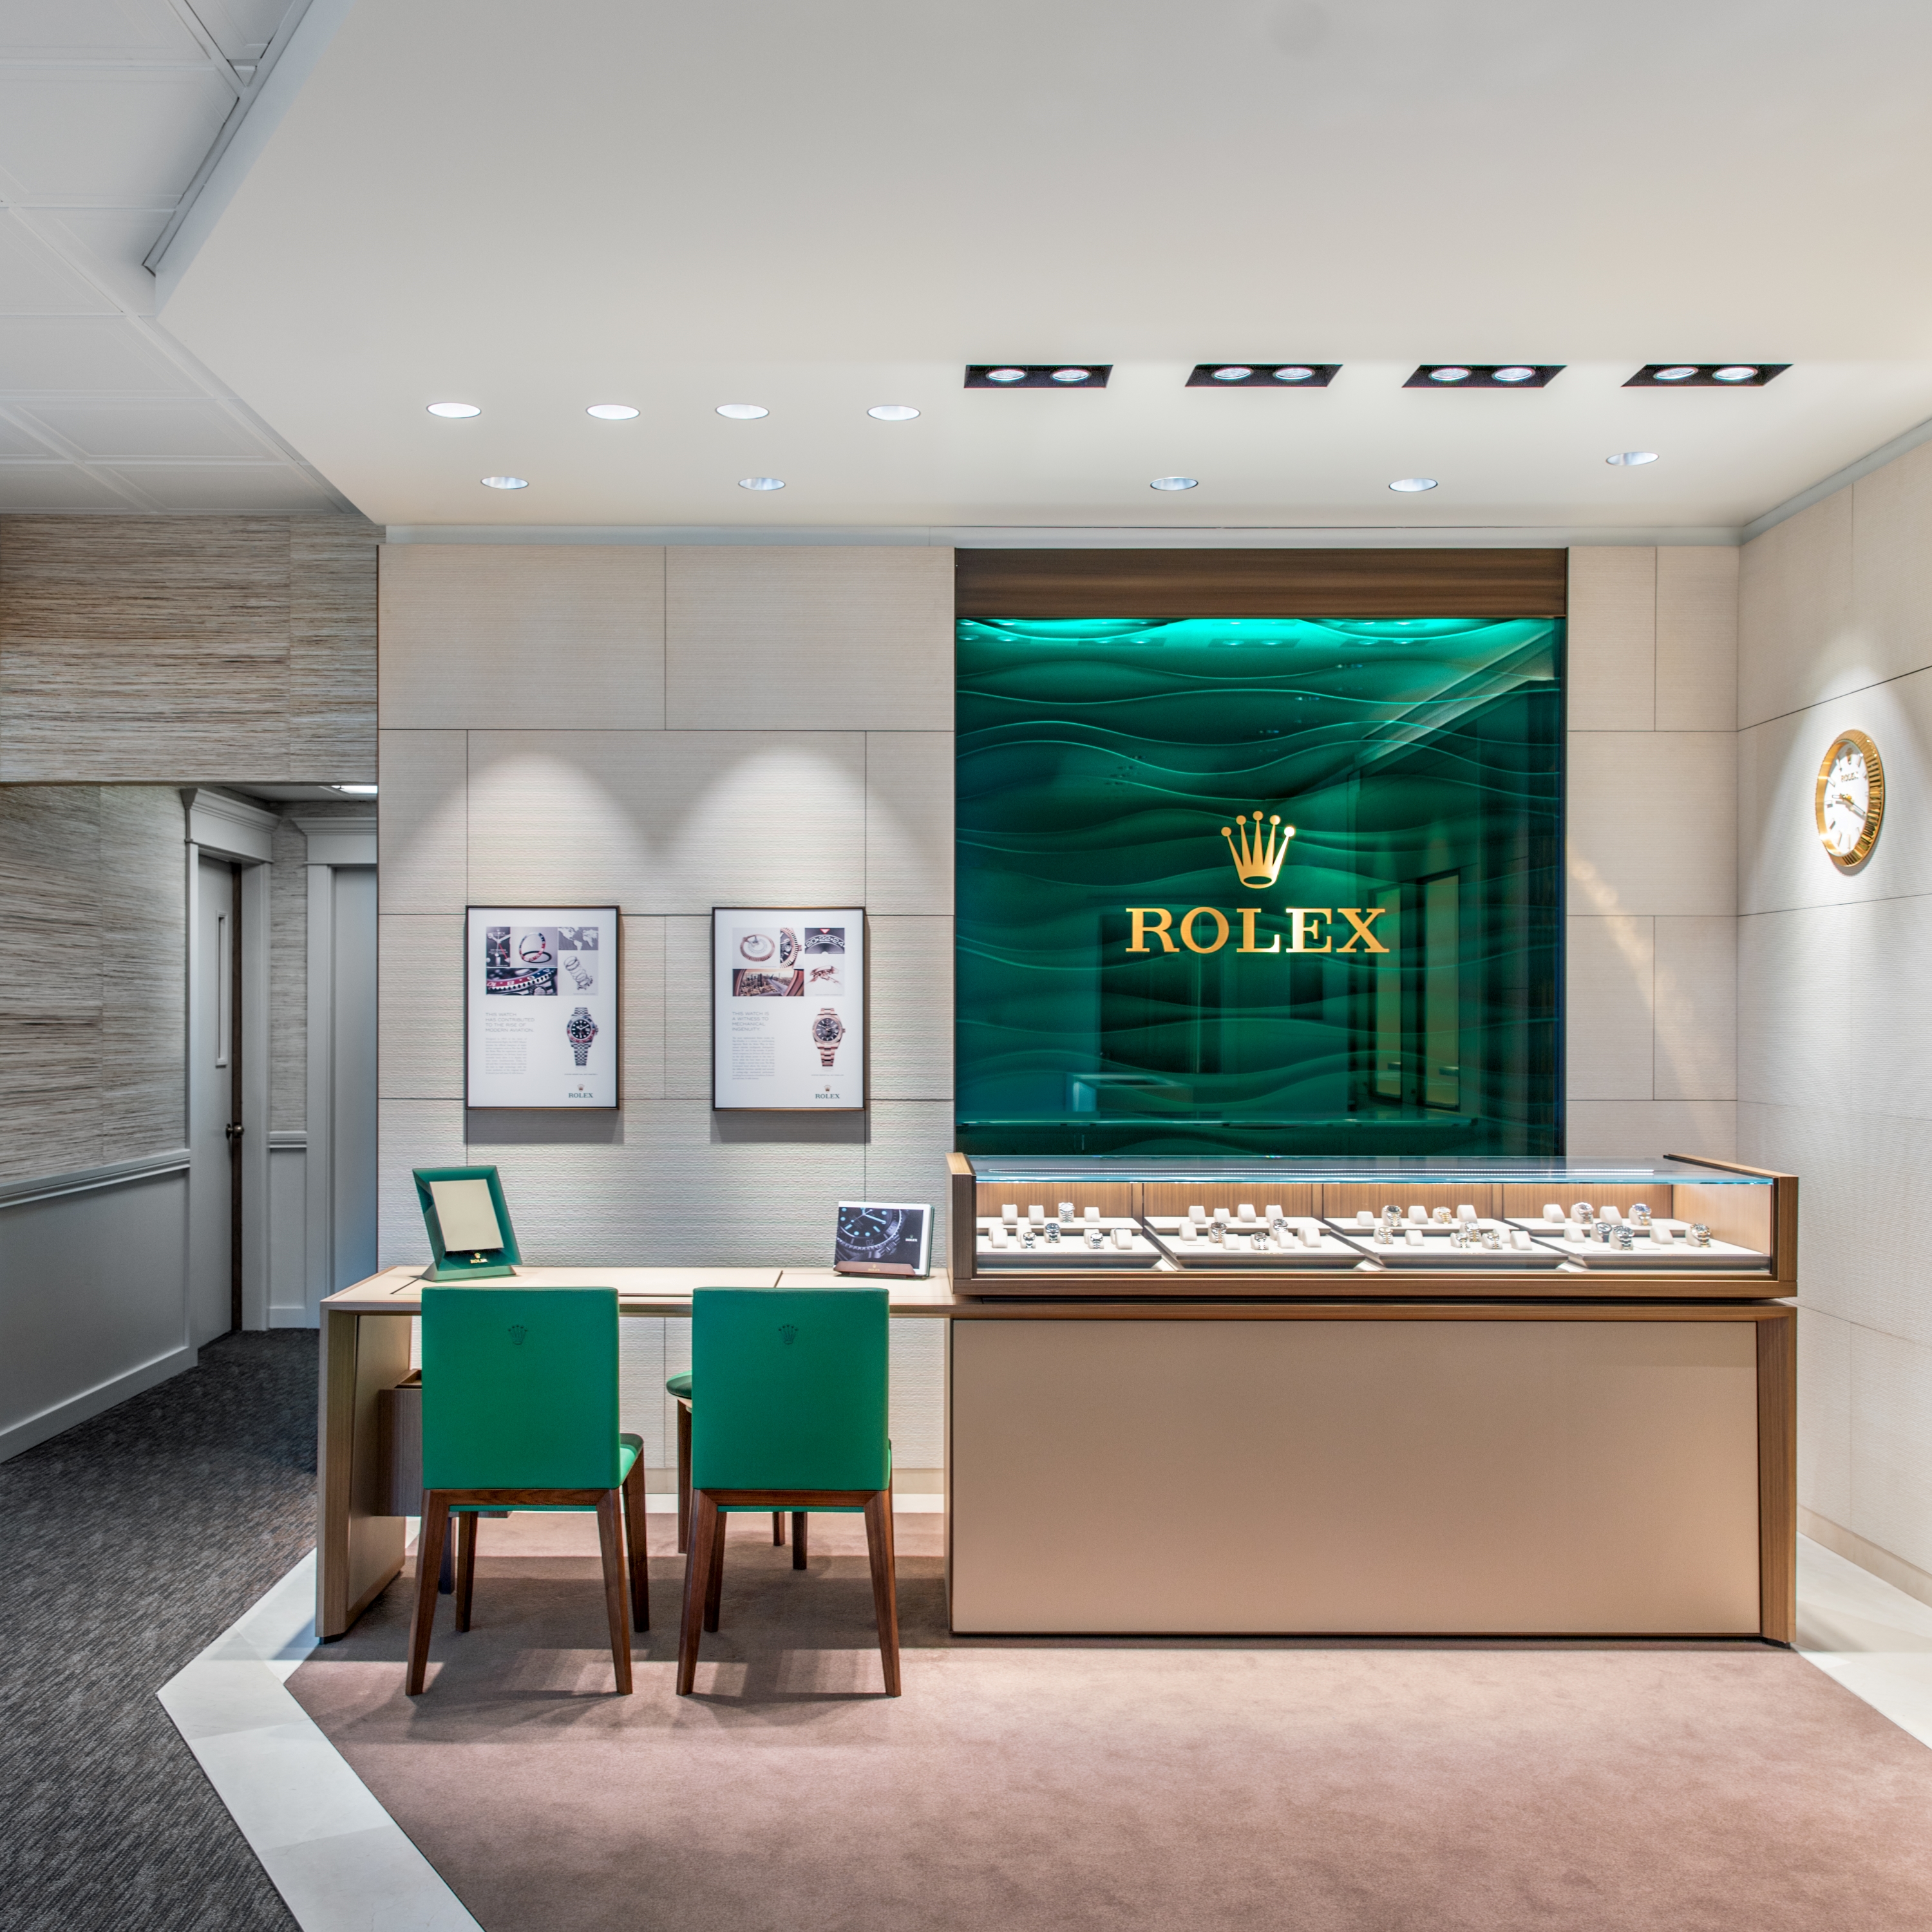 Jack Lewis Jewelers of Bloomington, Illinois is proud to be part of the worldwide network of Official Rolex Jewelers.